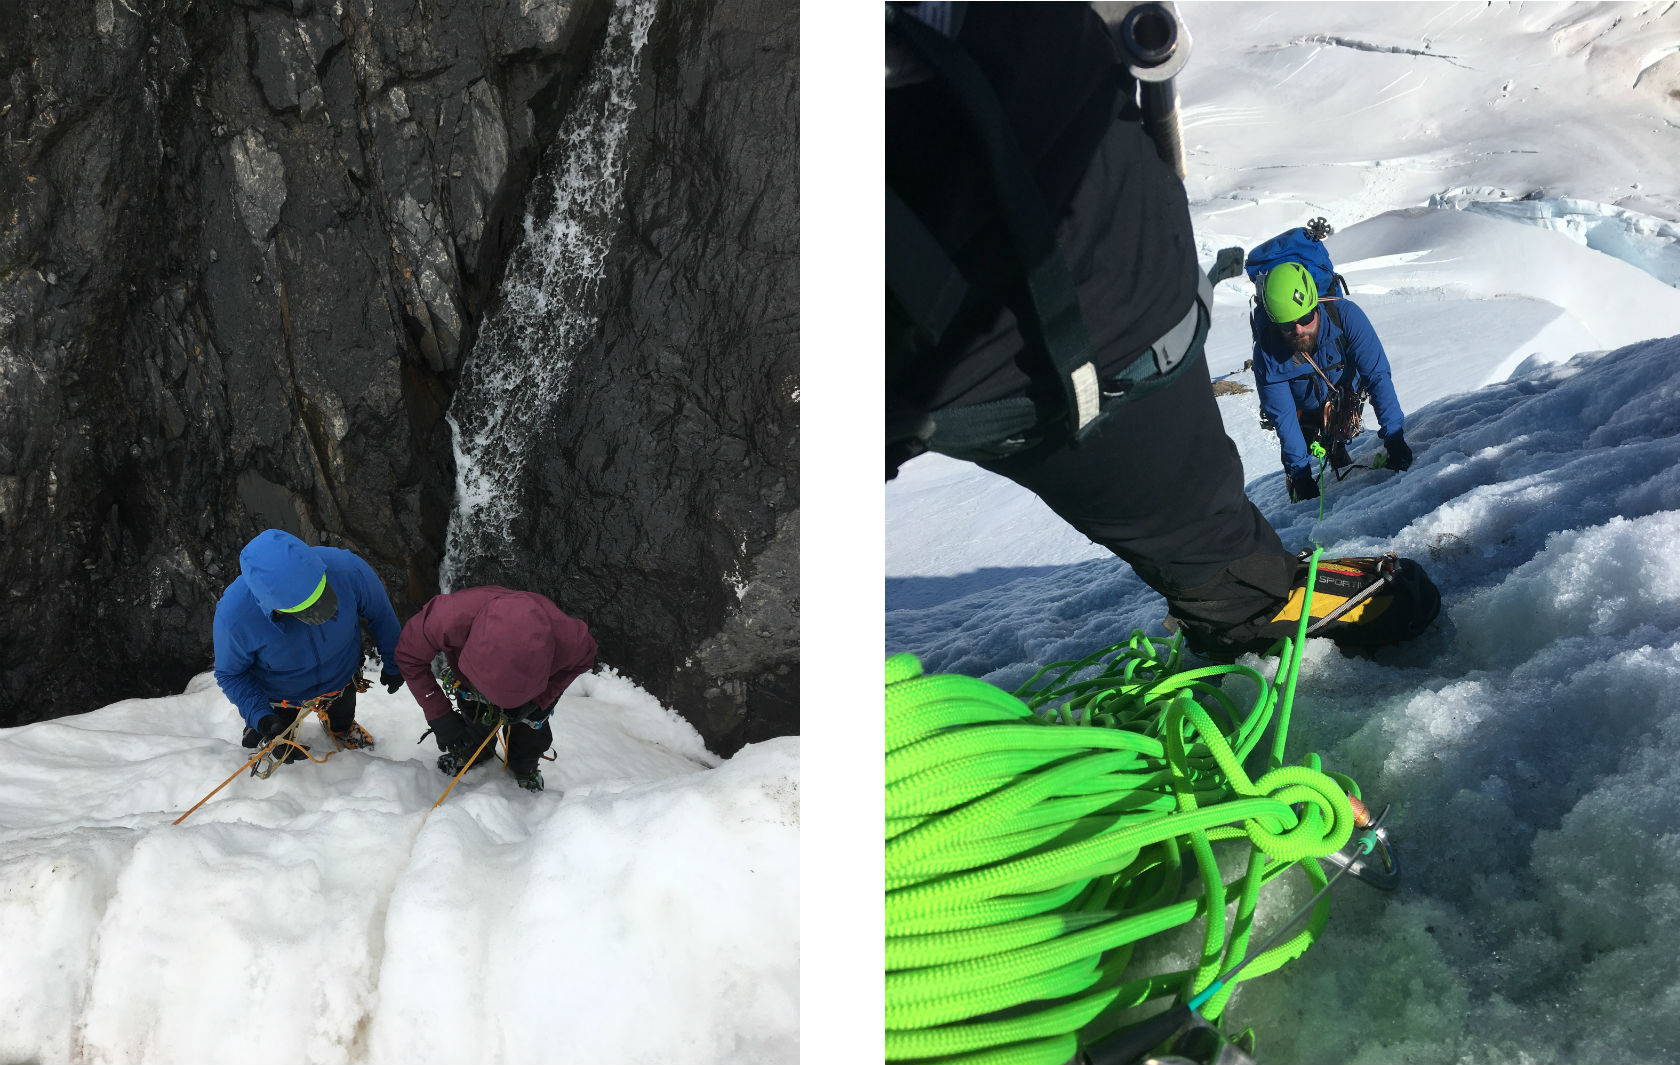 Rope work while ice climbing